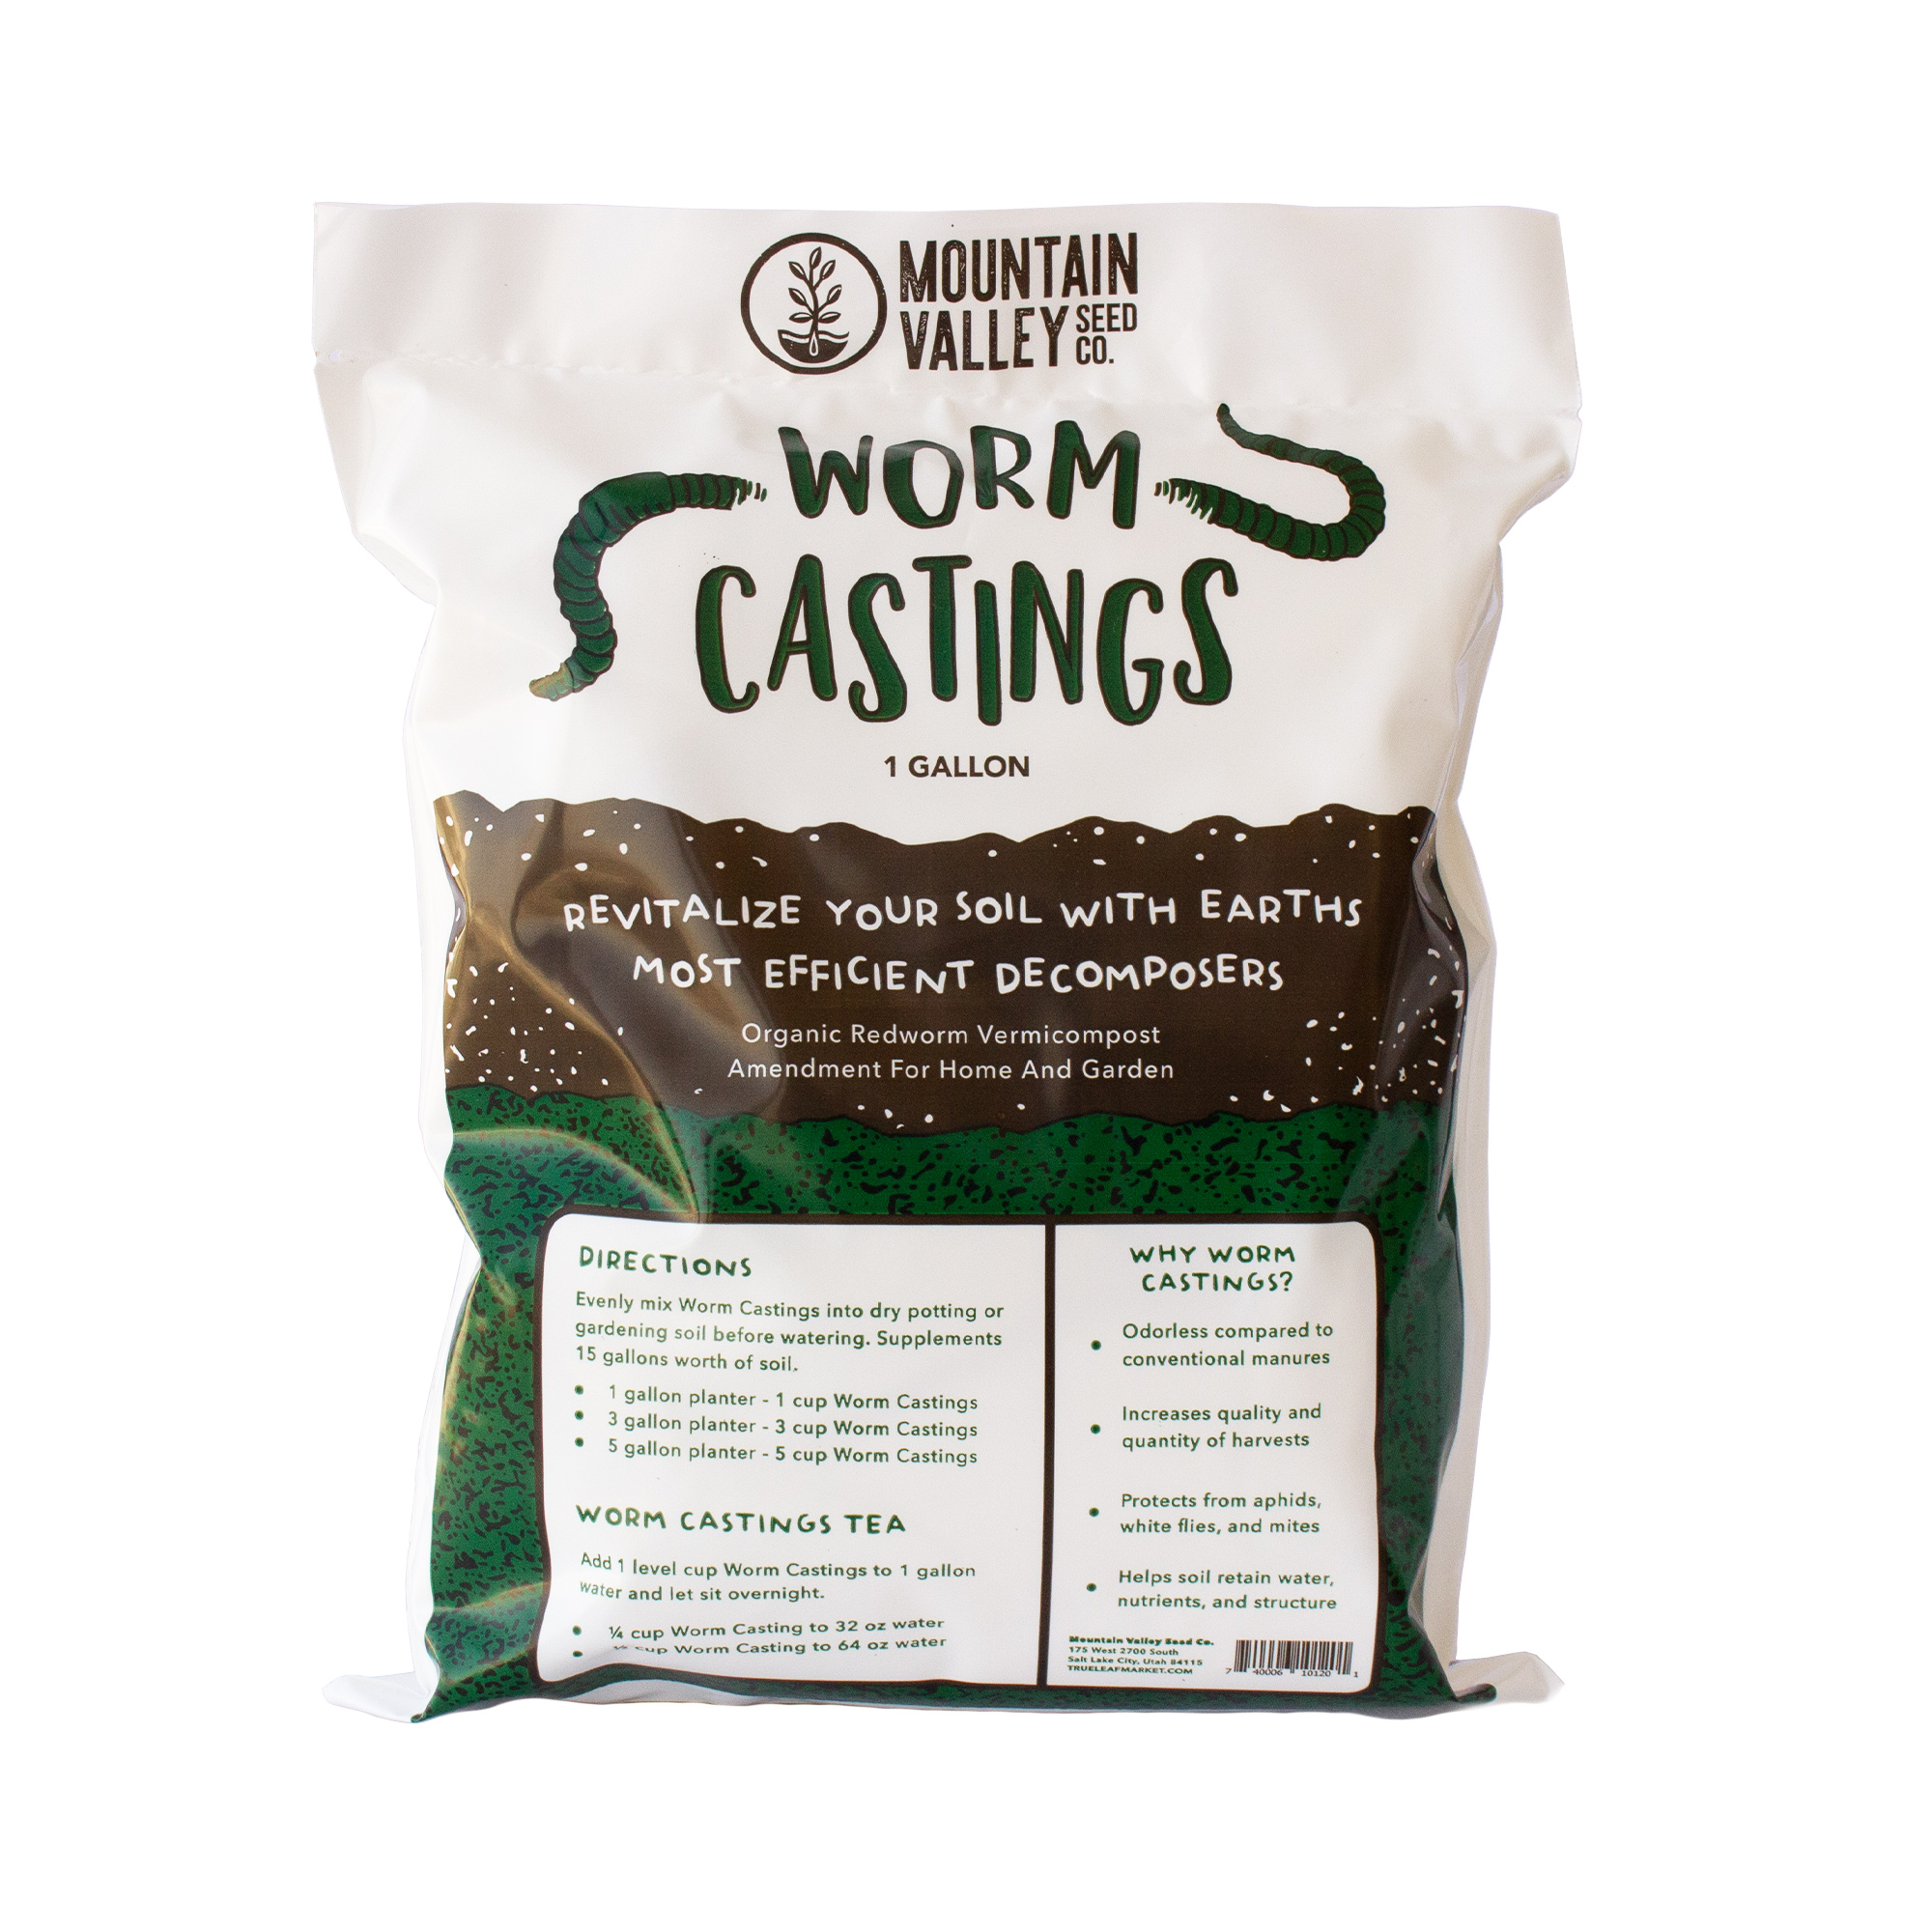 Earth Worm Castings – Organic Red Worm Compost Soil Amendment - .13 cubic foot - Approximately 1 Gallon - 6 Lbs - Organic Red Worm Vermiculture and Compost Home, Garden, Greenhouse, and Farm - image 1 of 7